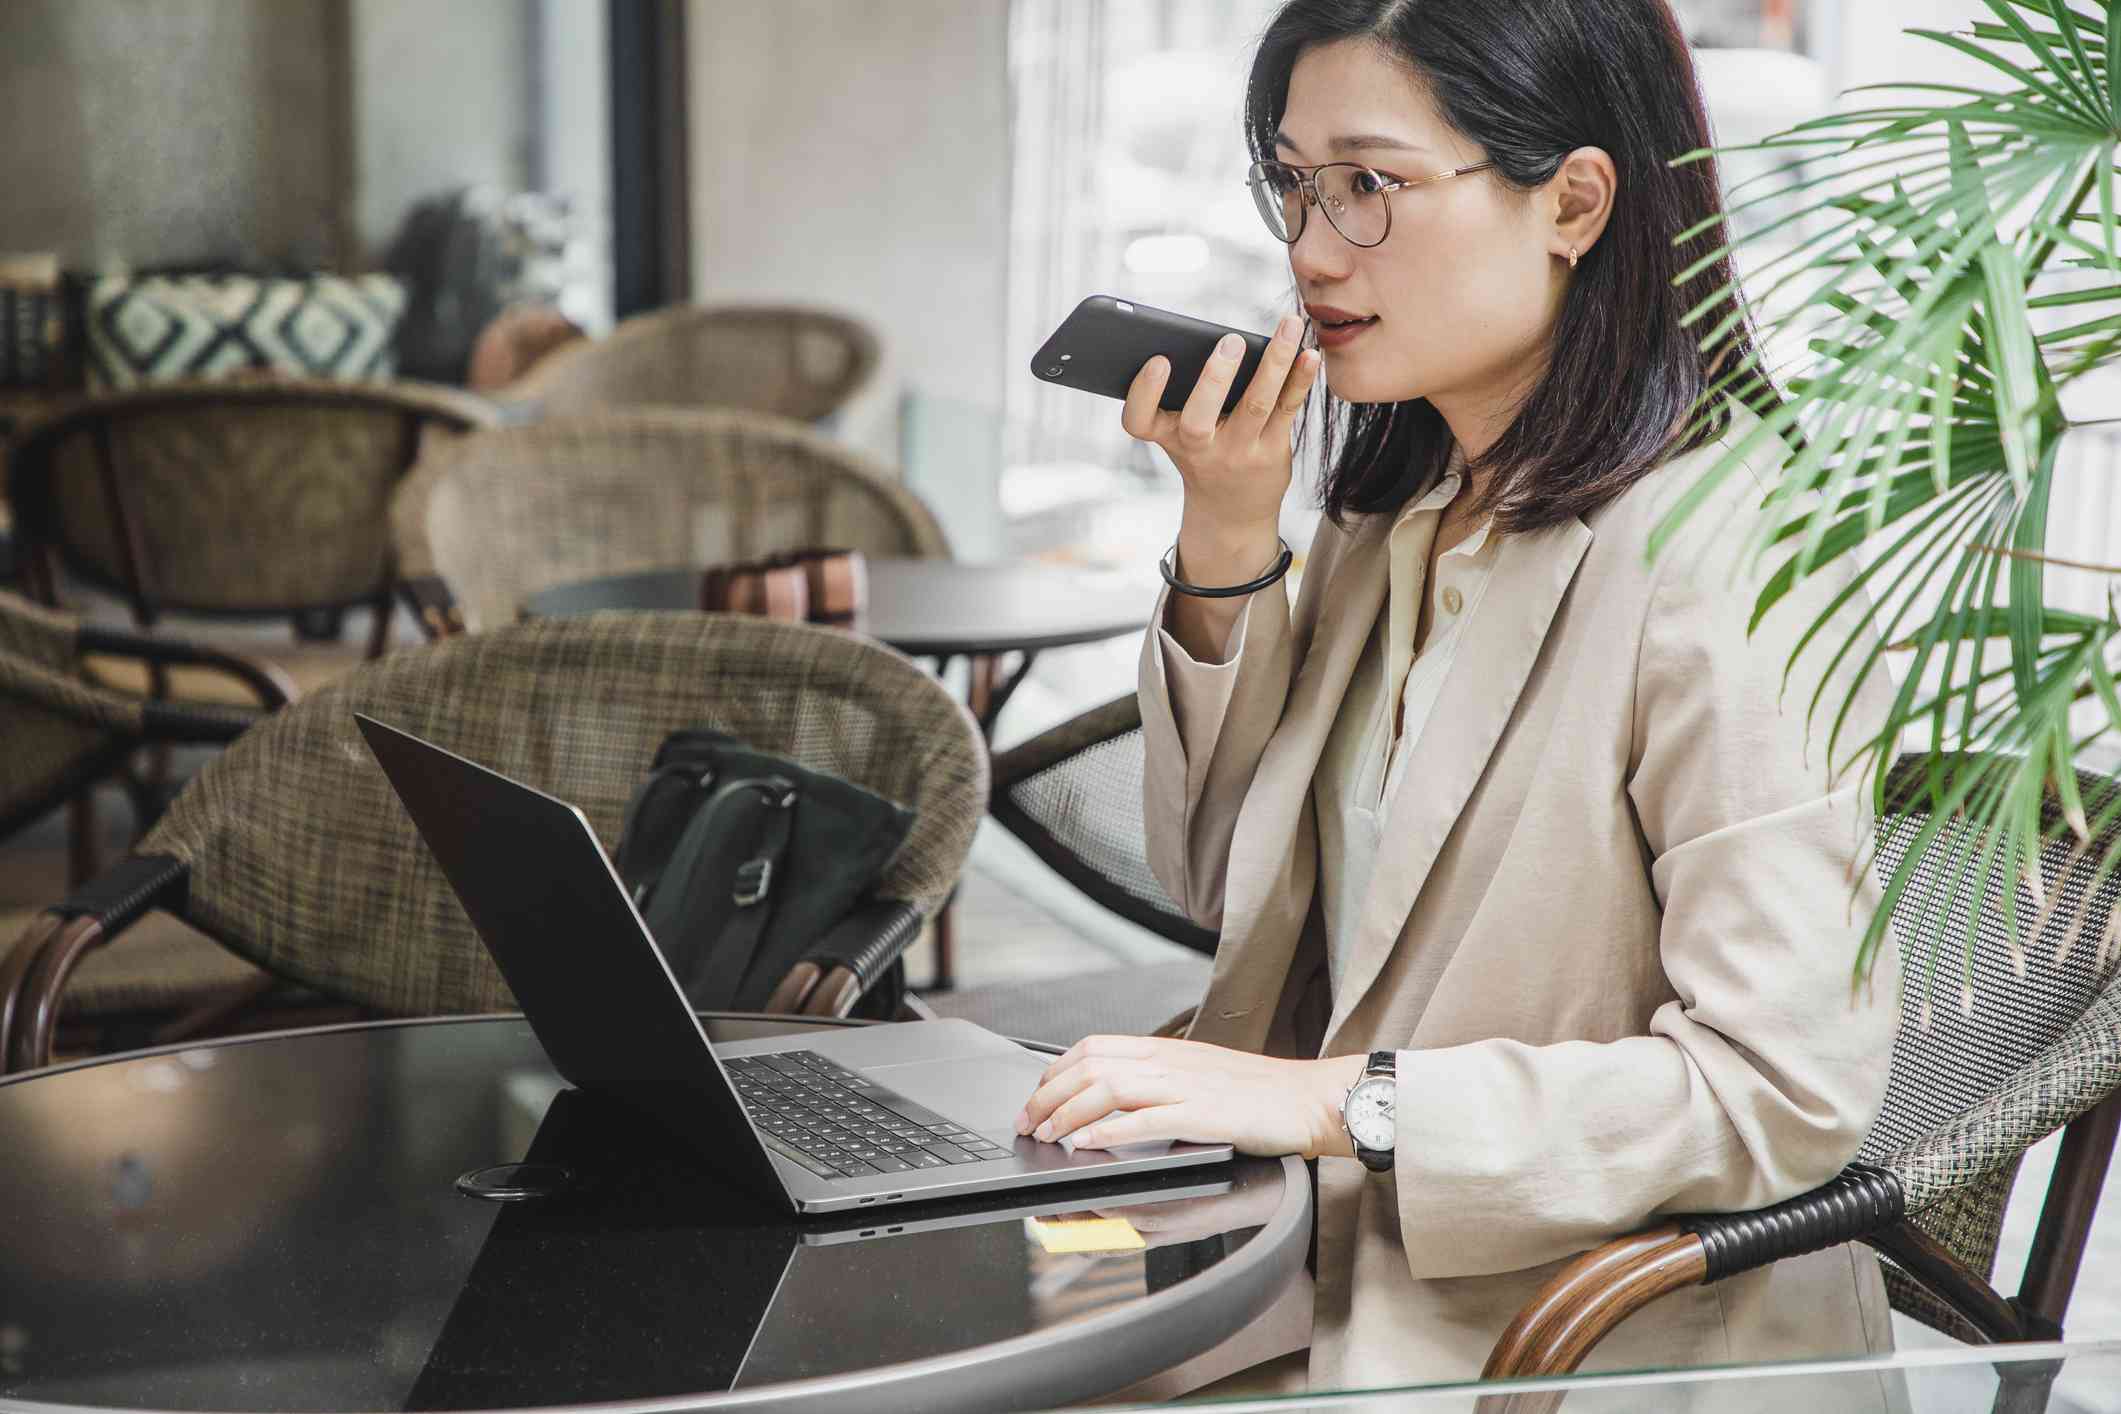 A female mental health professional sits outside at a table with her laptop open infront of her as she talks on the phone with a serious expression.